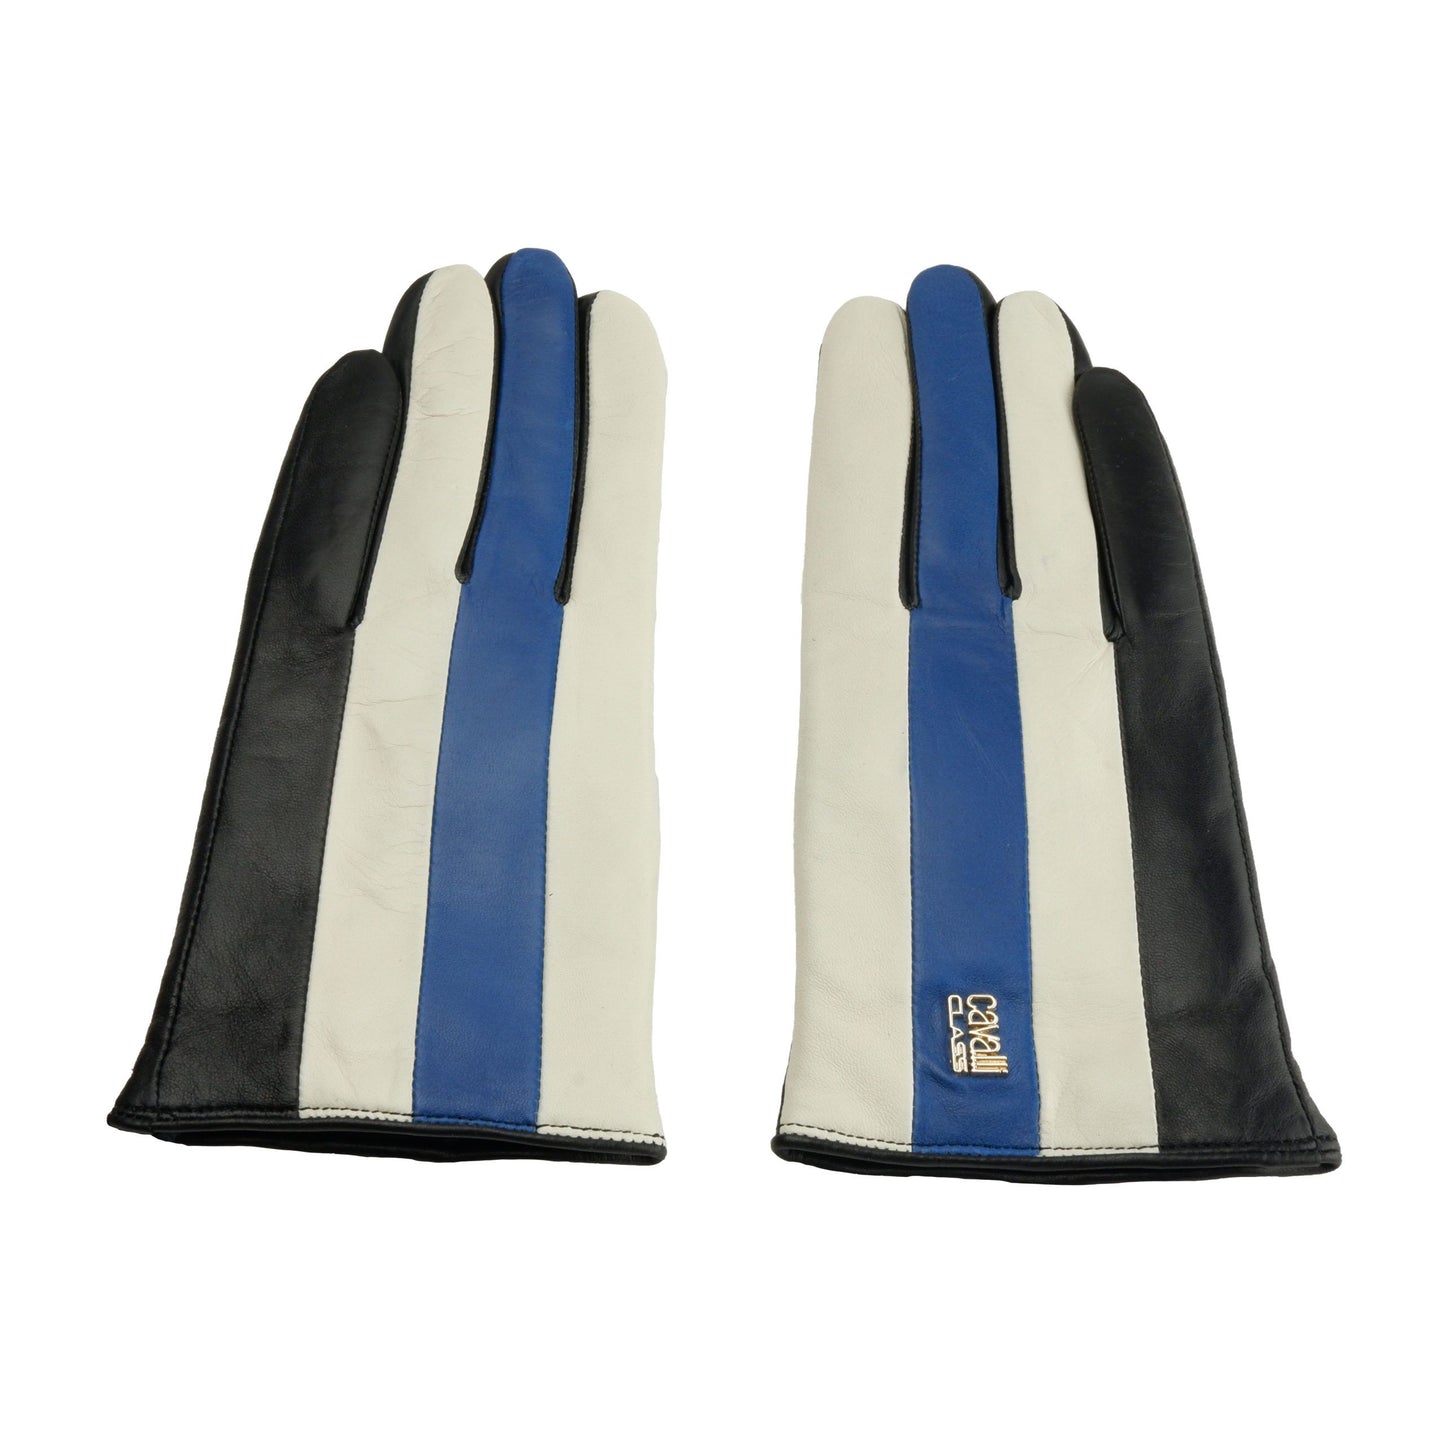 Cavalli Class Chic Blue and Black Lambskin Leather Gloves